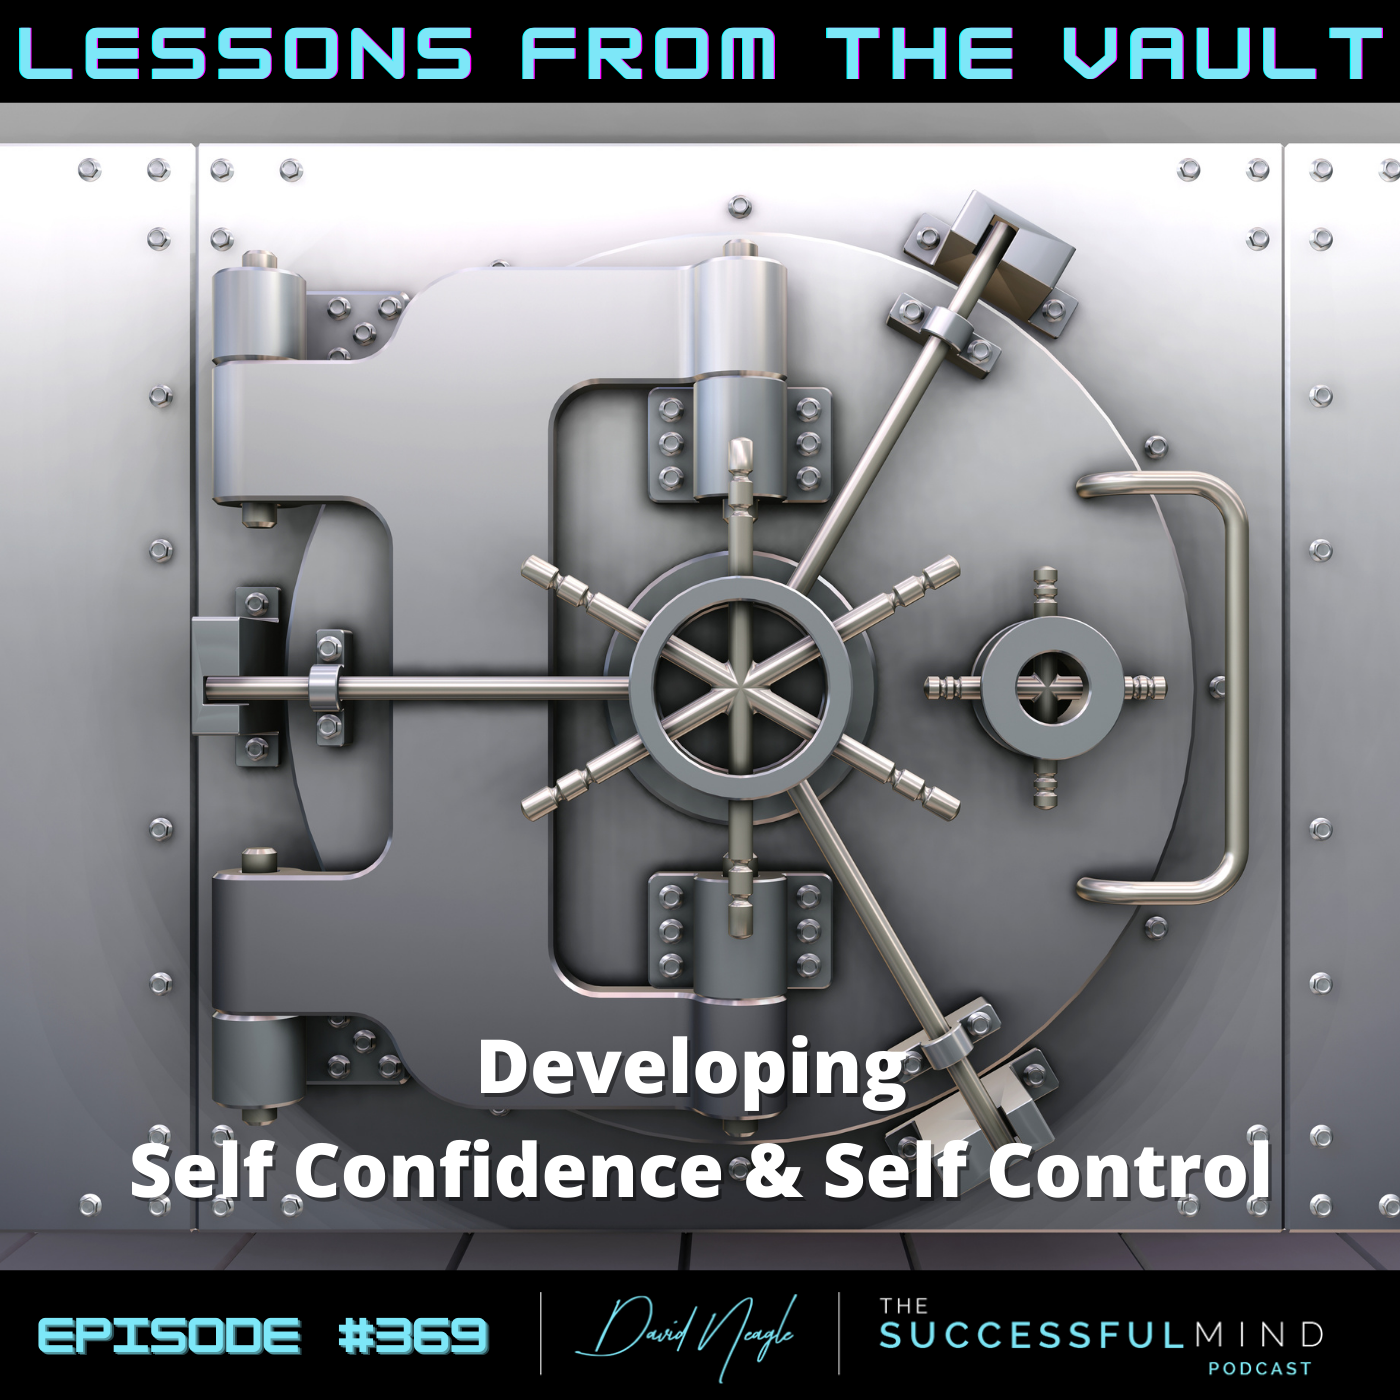 The Successful Mind Podcast – Episode 369 – Lessons From The Vault: Developing Self-Confidence & Self-Control